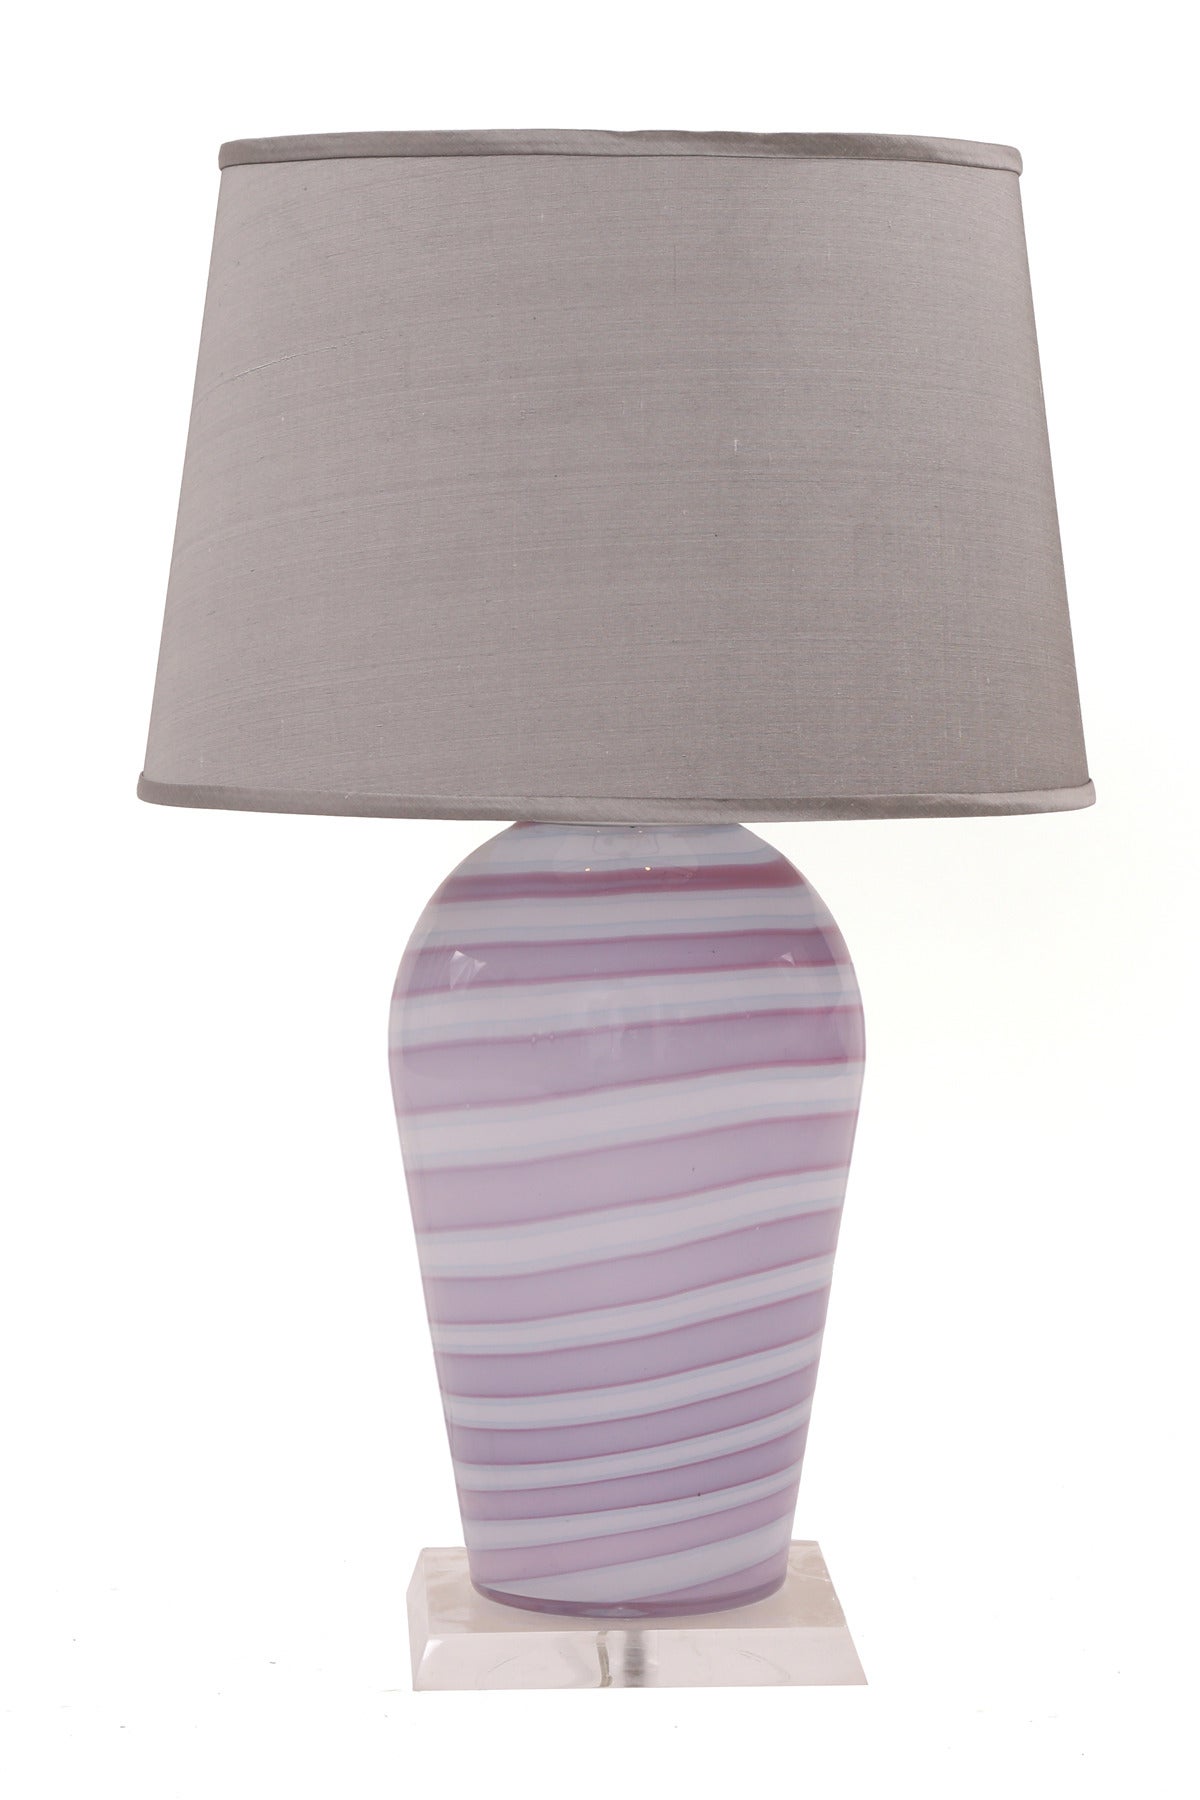 Pair of Murano glass and lucite table lamps from Italy, circa early 1970s. These unusual examples incorporate hues of purples and grays and sit atop square lucite bases. Measurement to top of socket is 19.5